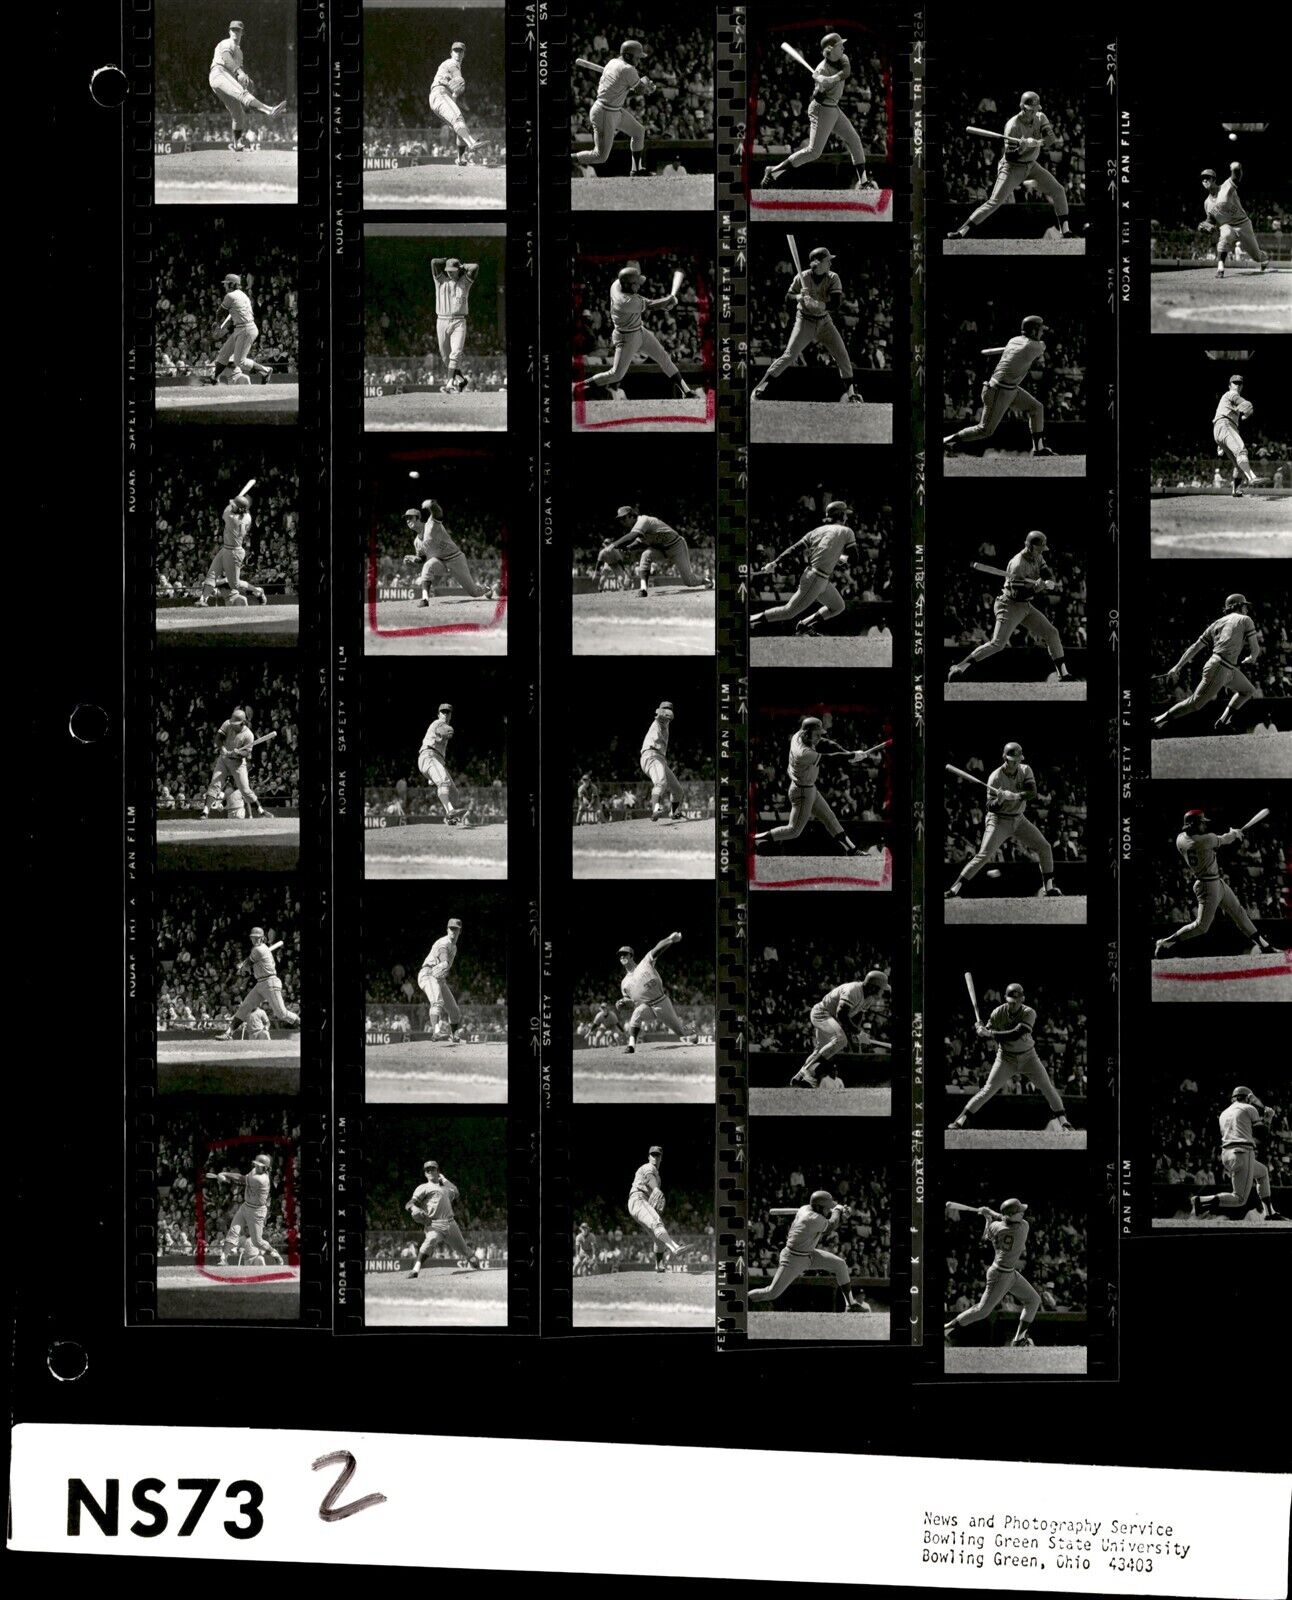 LD345 1974 Orig Contact Sheet Photo CLYDE WRIGHT MILW BREWERS - DETROIT TIGERS